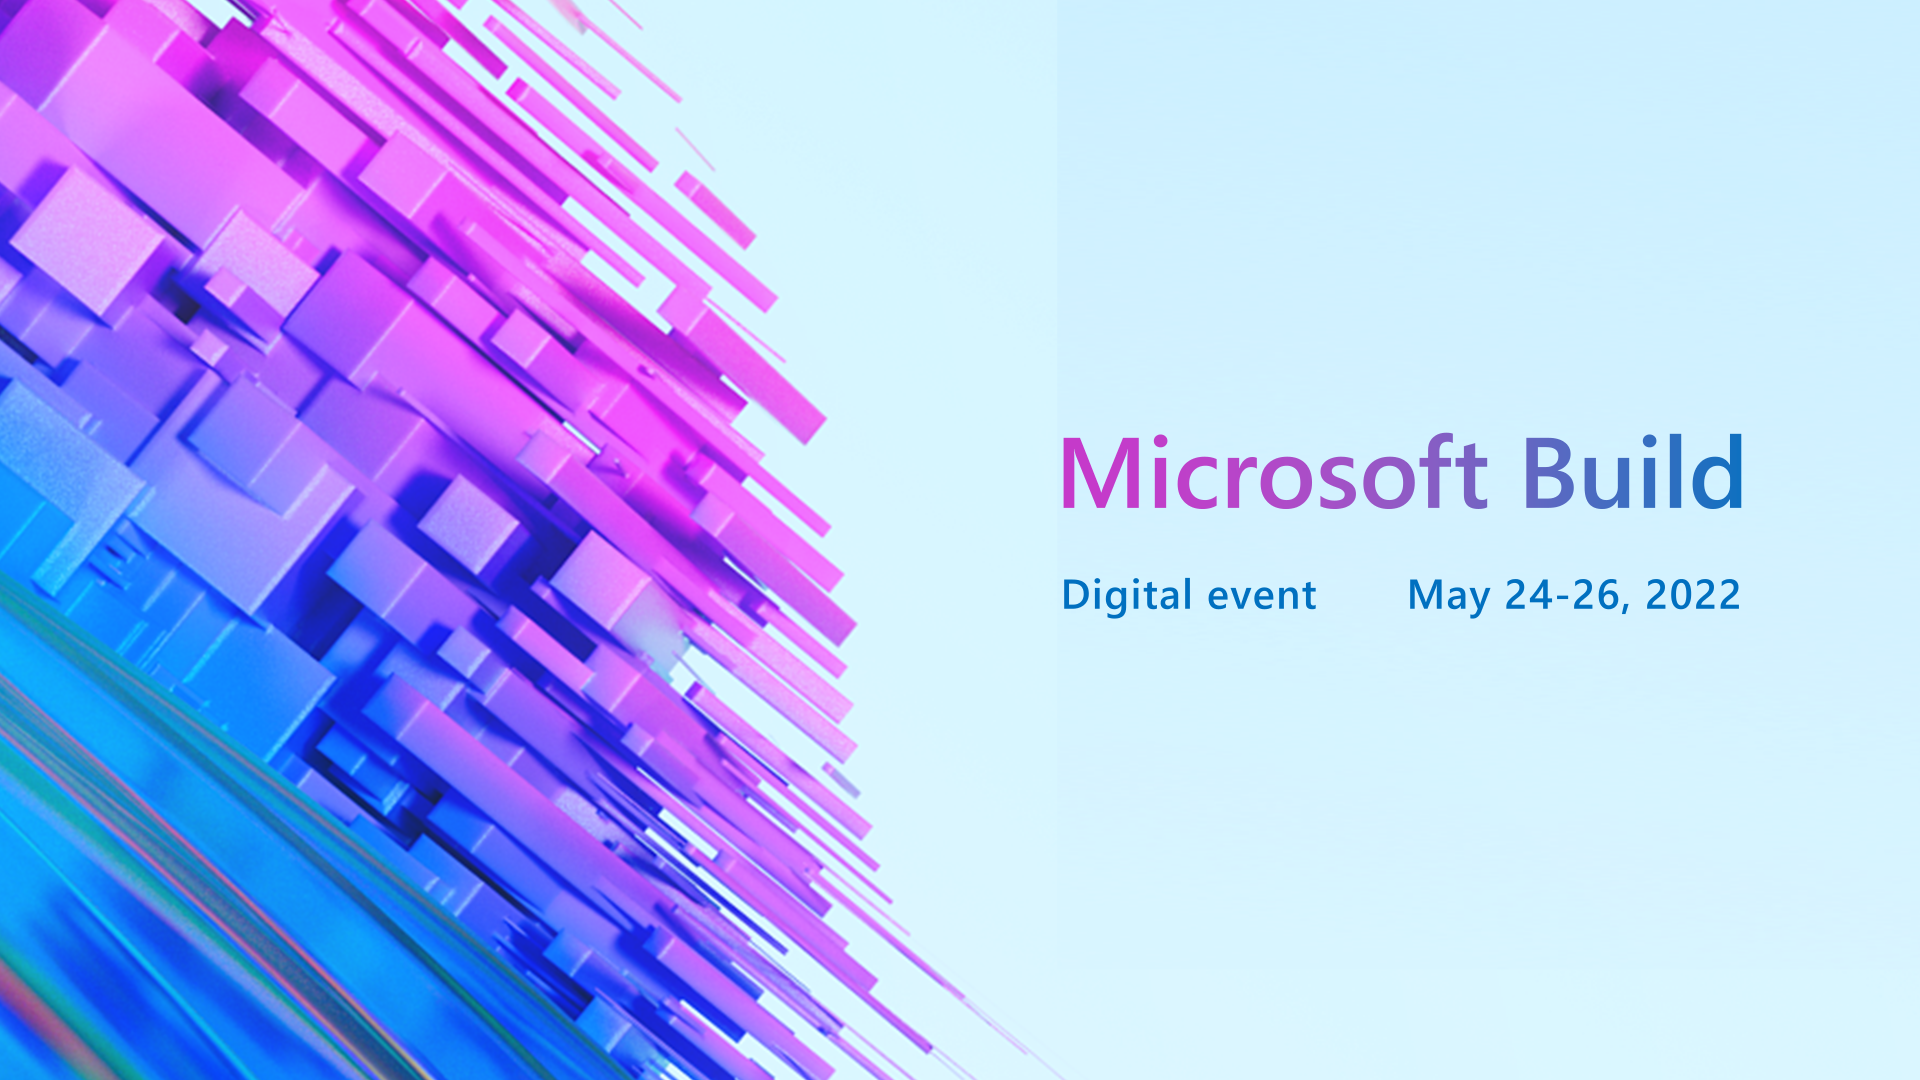 Discover Industry Breakthroughs Using AI Technology at Microsoft Build 2022